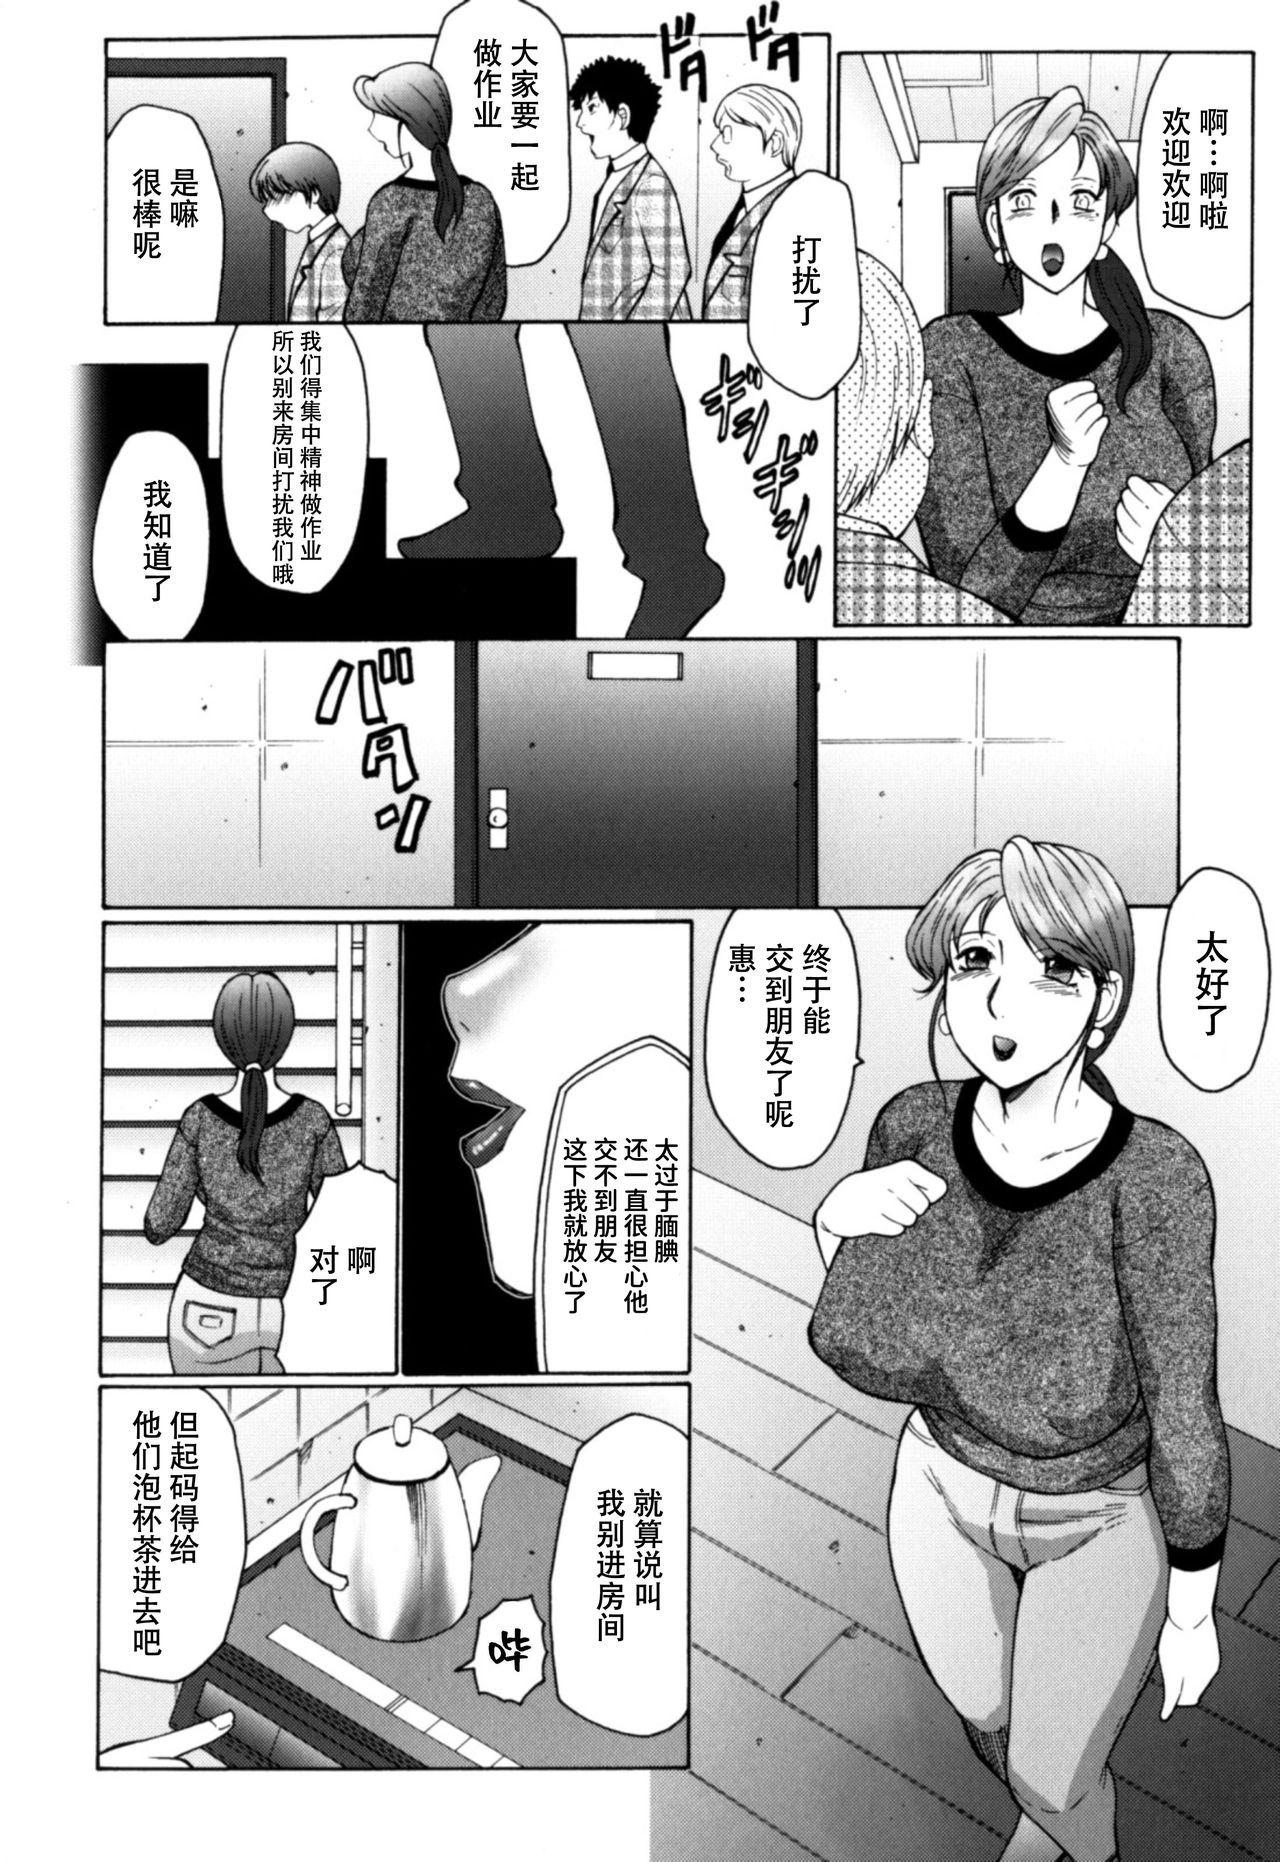 Assfingering [Fuusen Club] Haha Mamire Ch. 1 [Chinese]【不可视汉化】 Camsex - Page 5